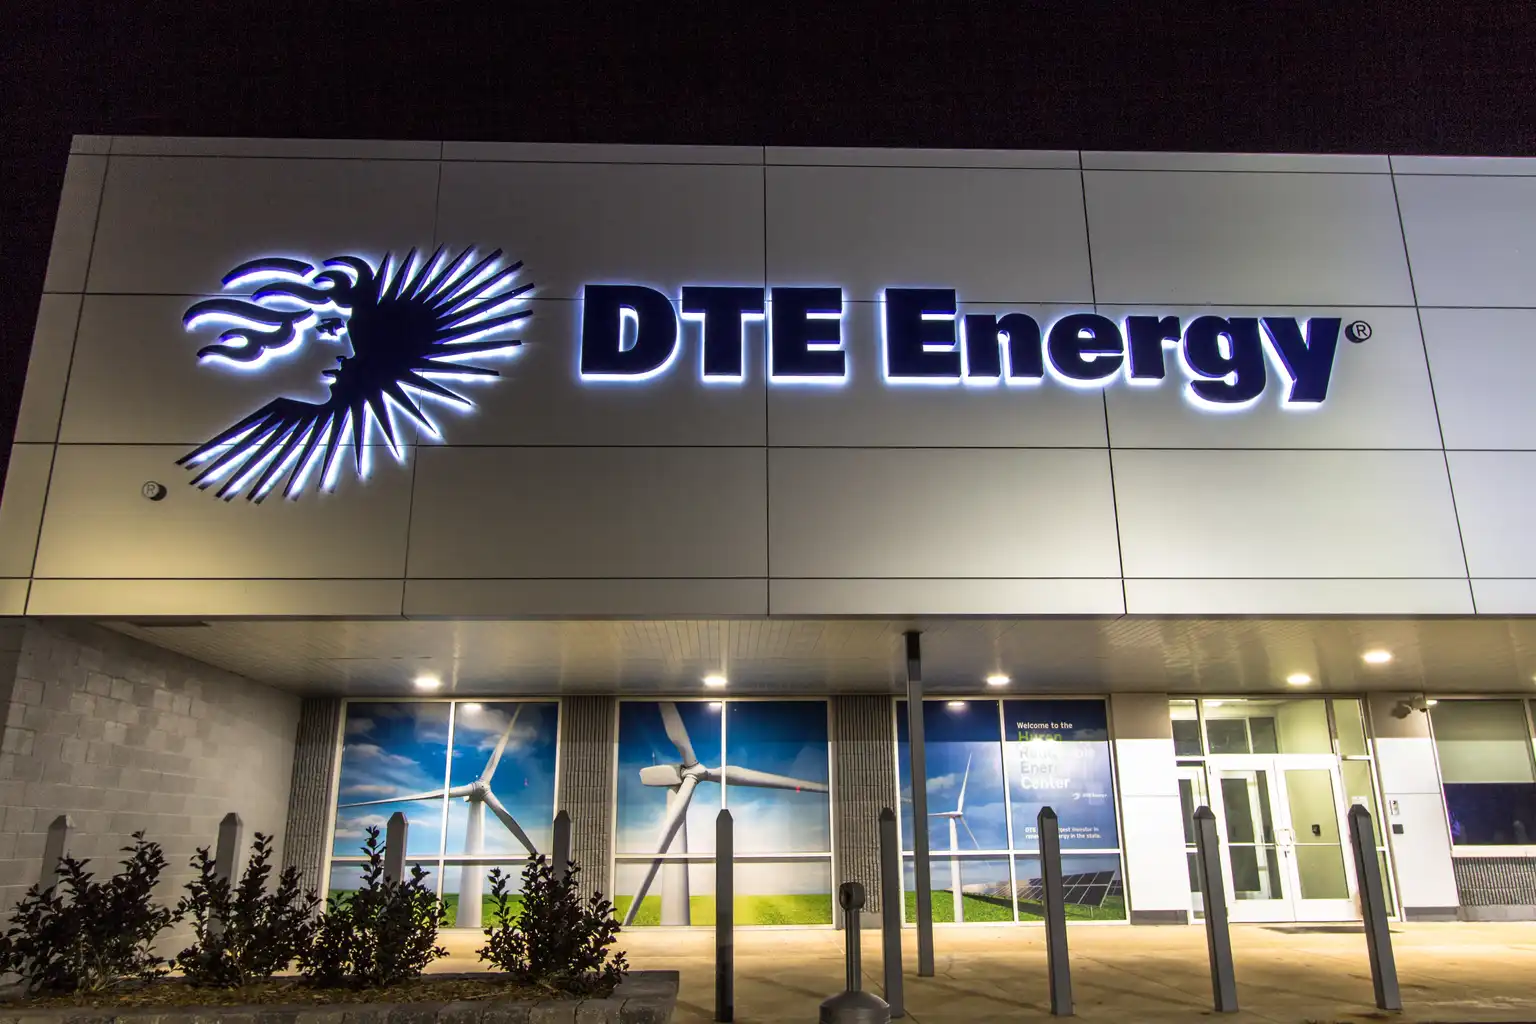 DTE Energy: A Much-Improved Growth Story With Better Valuation (Rating Upgrade) - Seeking Alpha